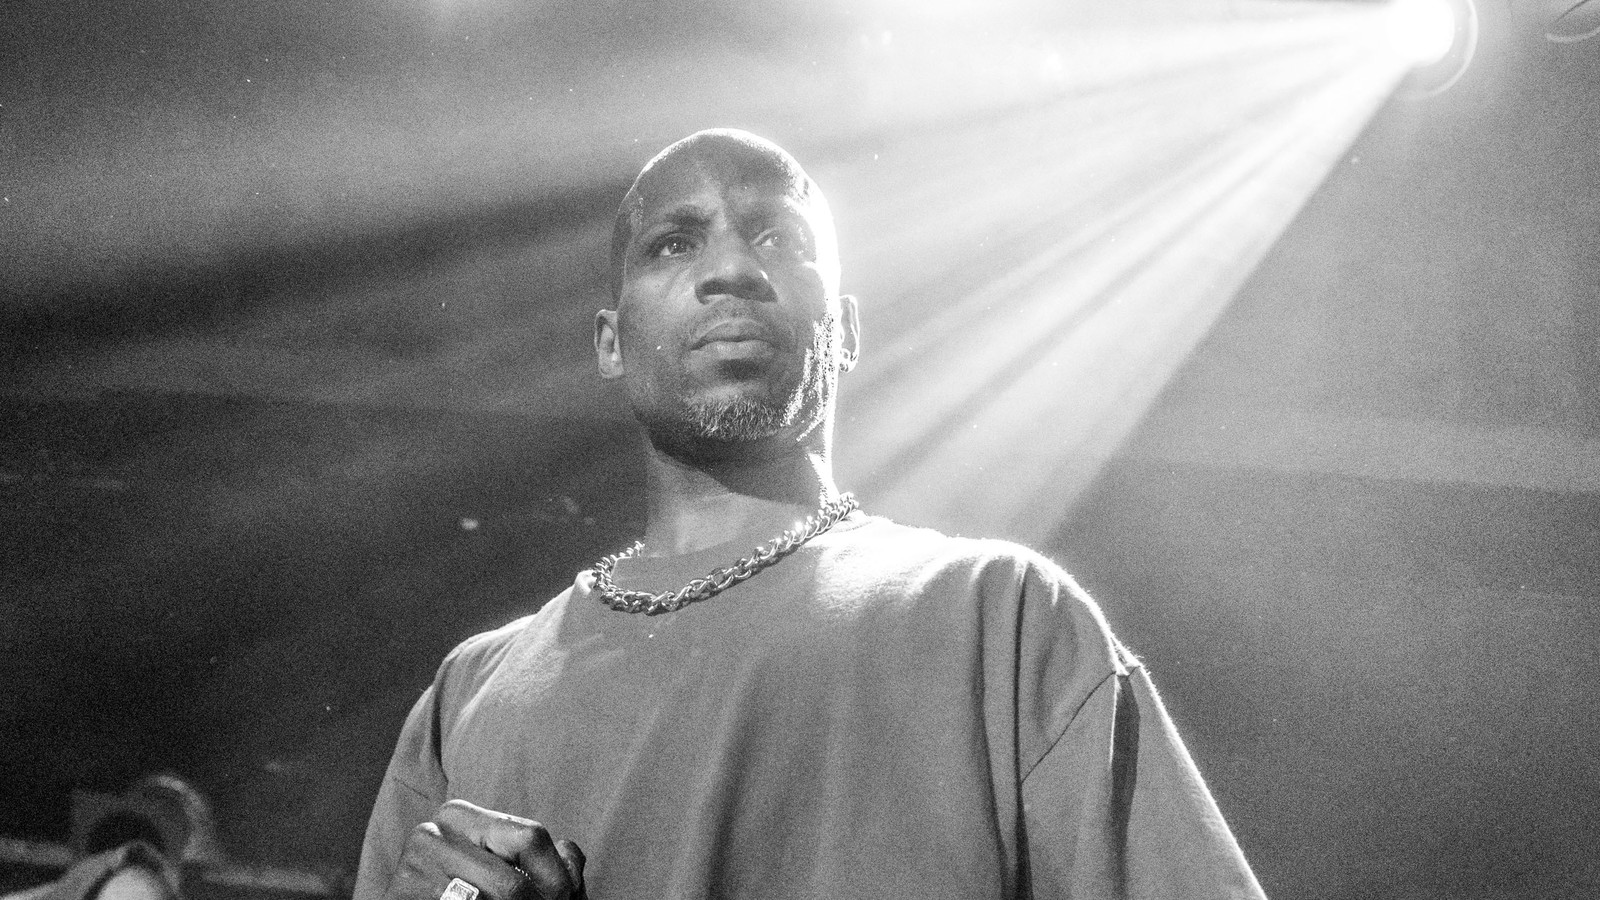 DMX death: The rapper's final interview should be a wake-up call.